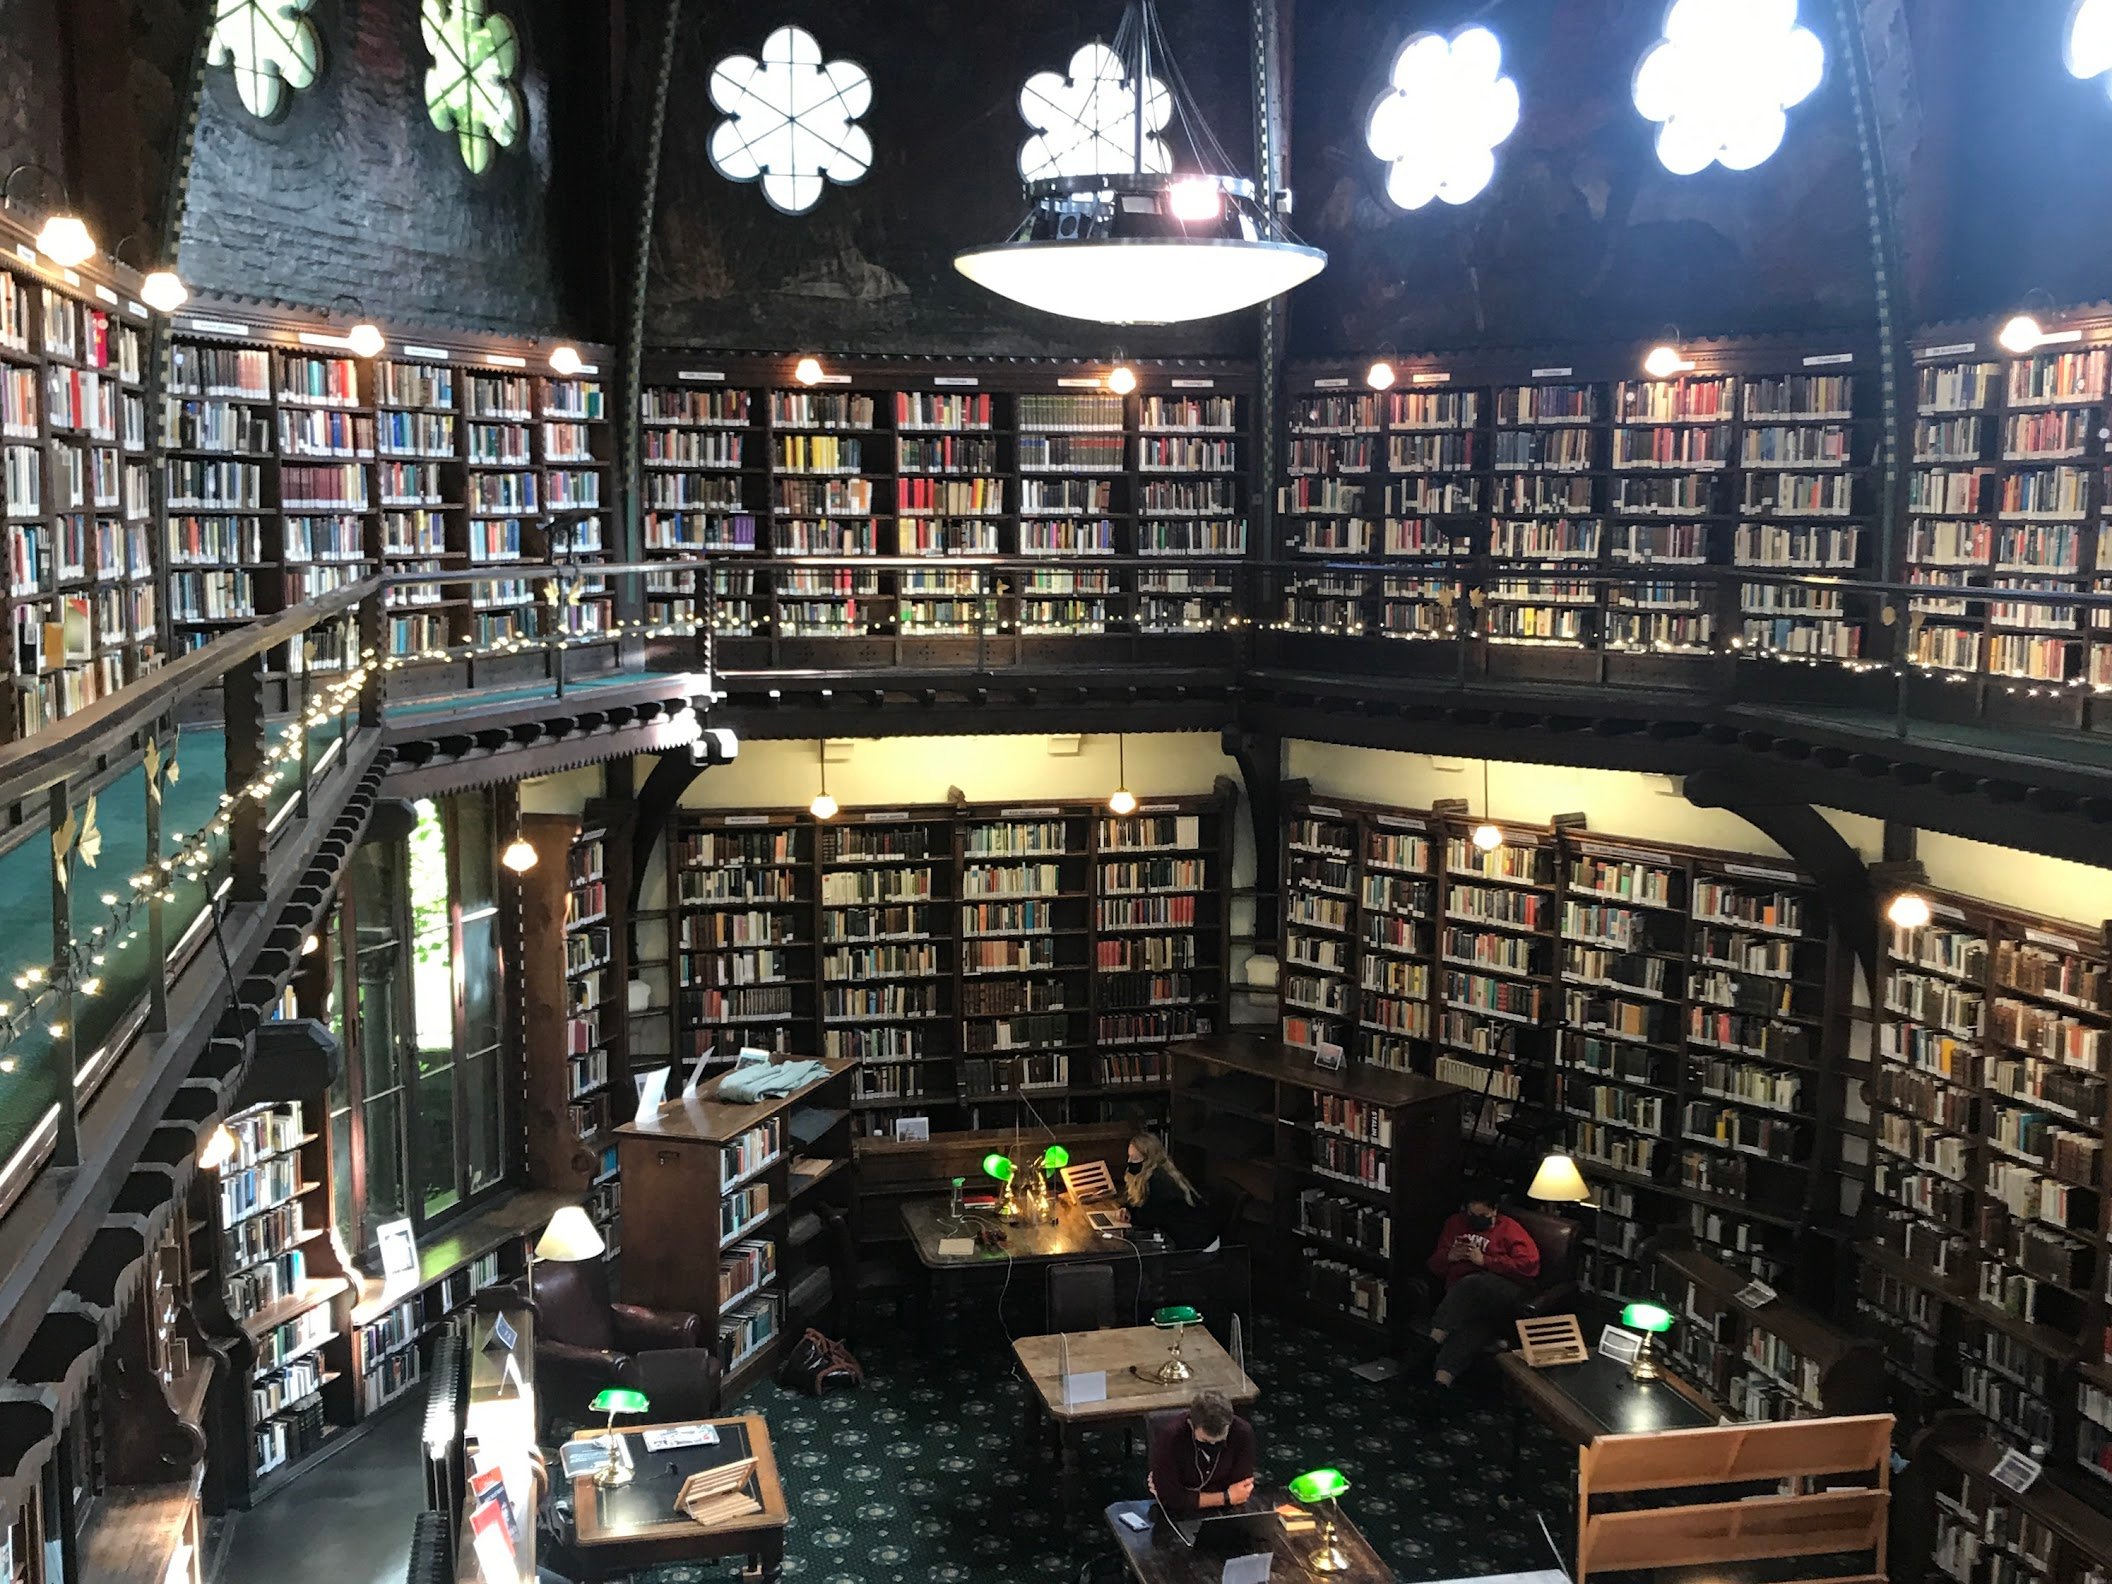 A photo taken from the top floor of the Oxford Union Library showing bookshelves and people working on the bottom floor. 